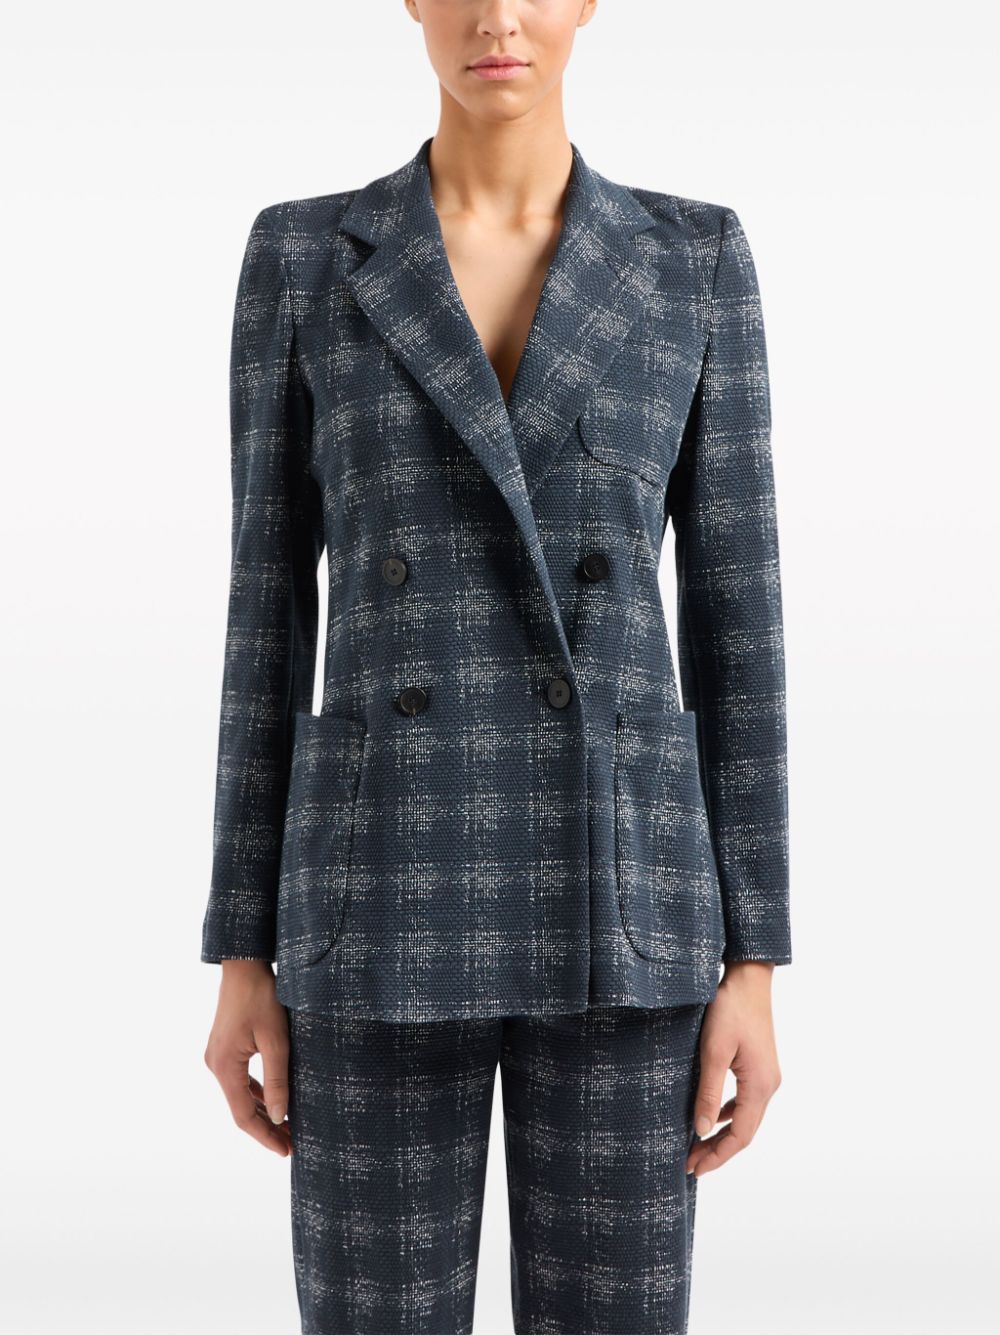 EMPORIO ARMANI Navy Blue Stretch Blazer Jacket with Check Pattern and Notched Lapels for Women